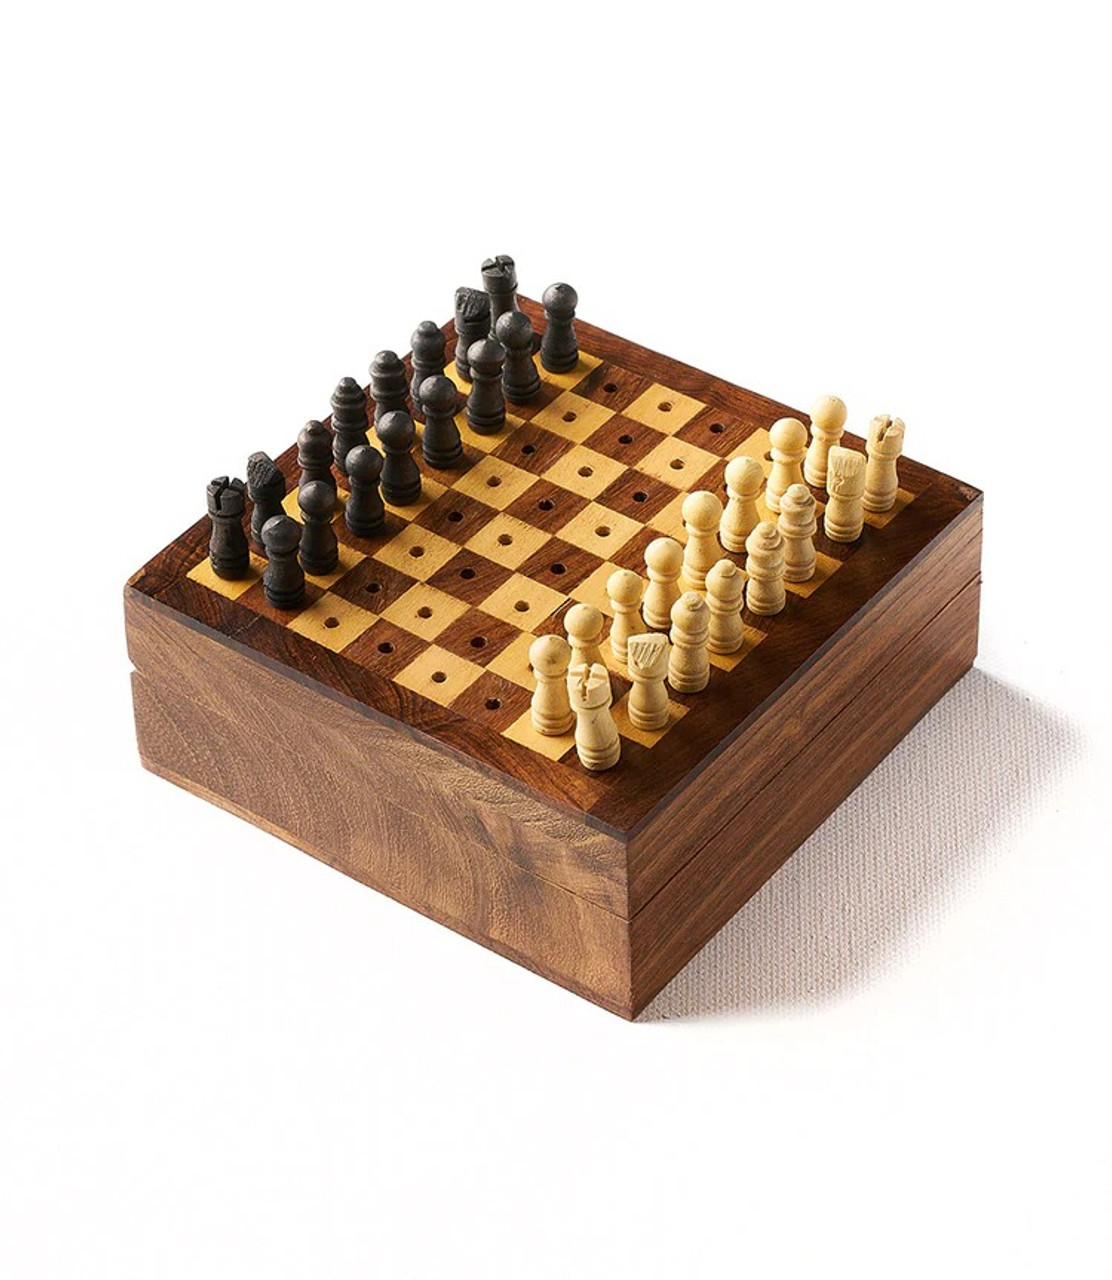 Game Gallery Chess & Checkers Wood Set for sale online